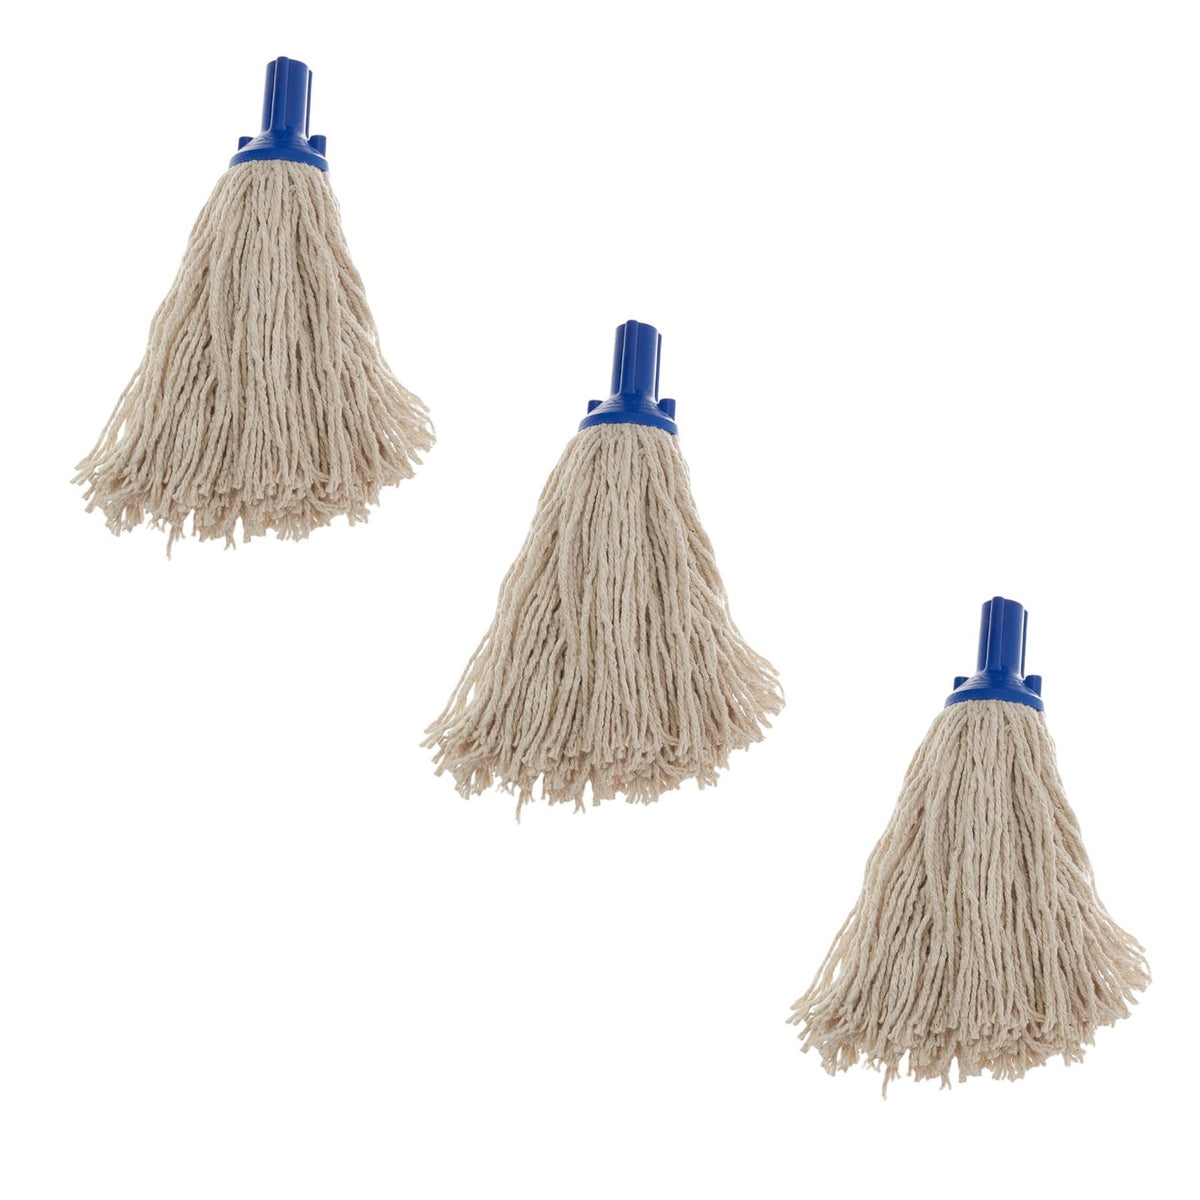 Exel Cotton Mop Heads 250 grams Pack of 3 Blue